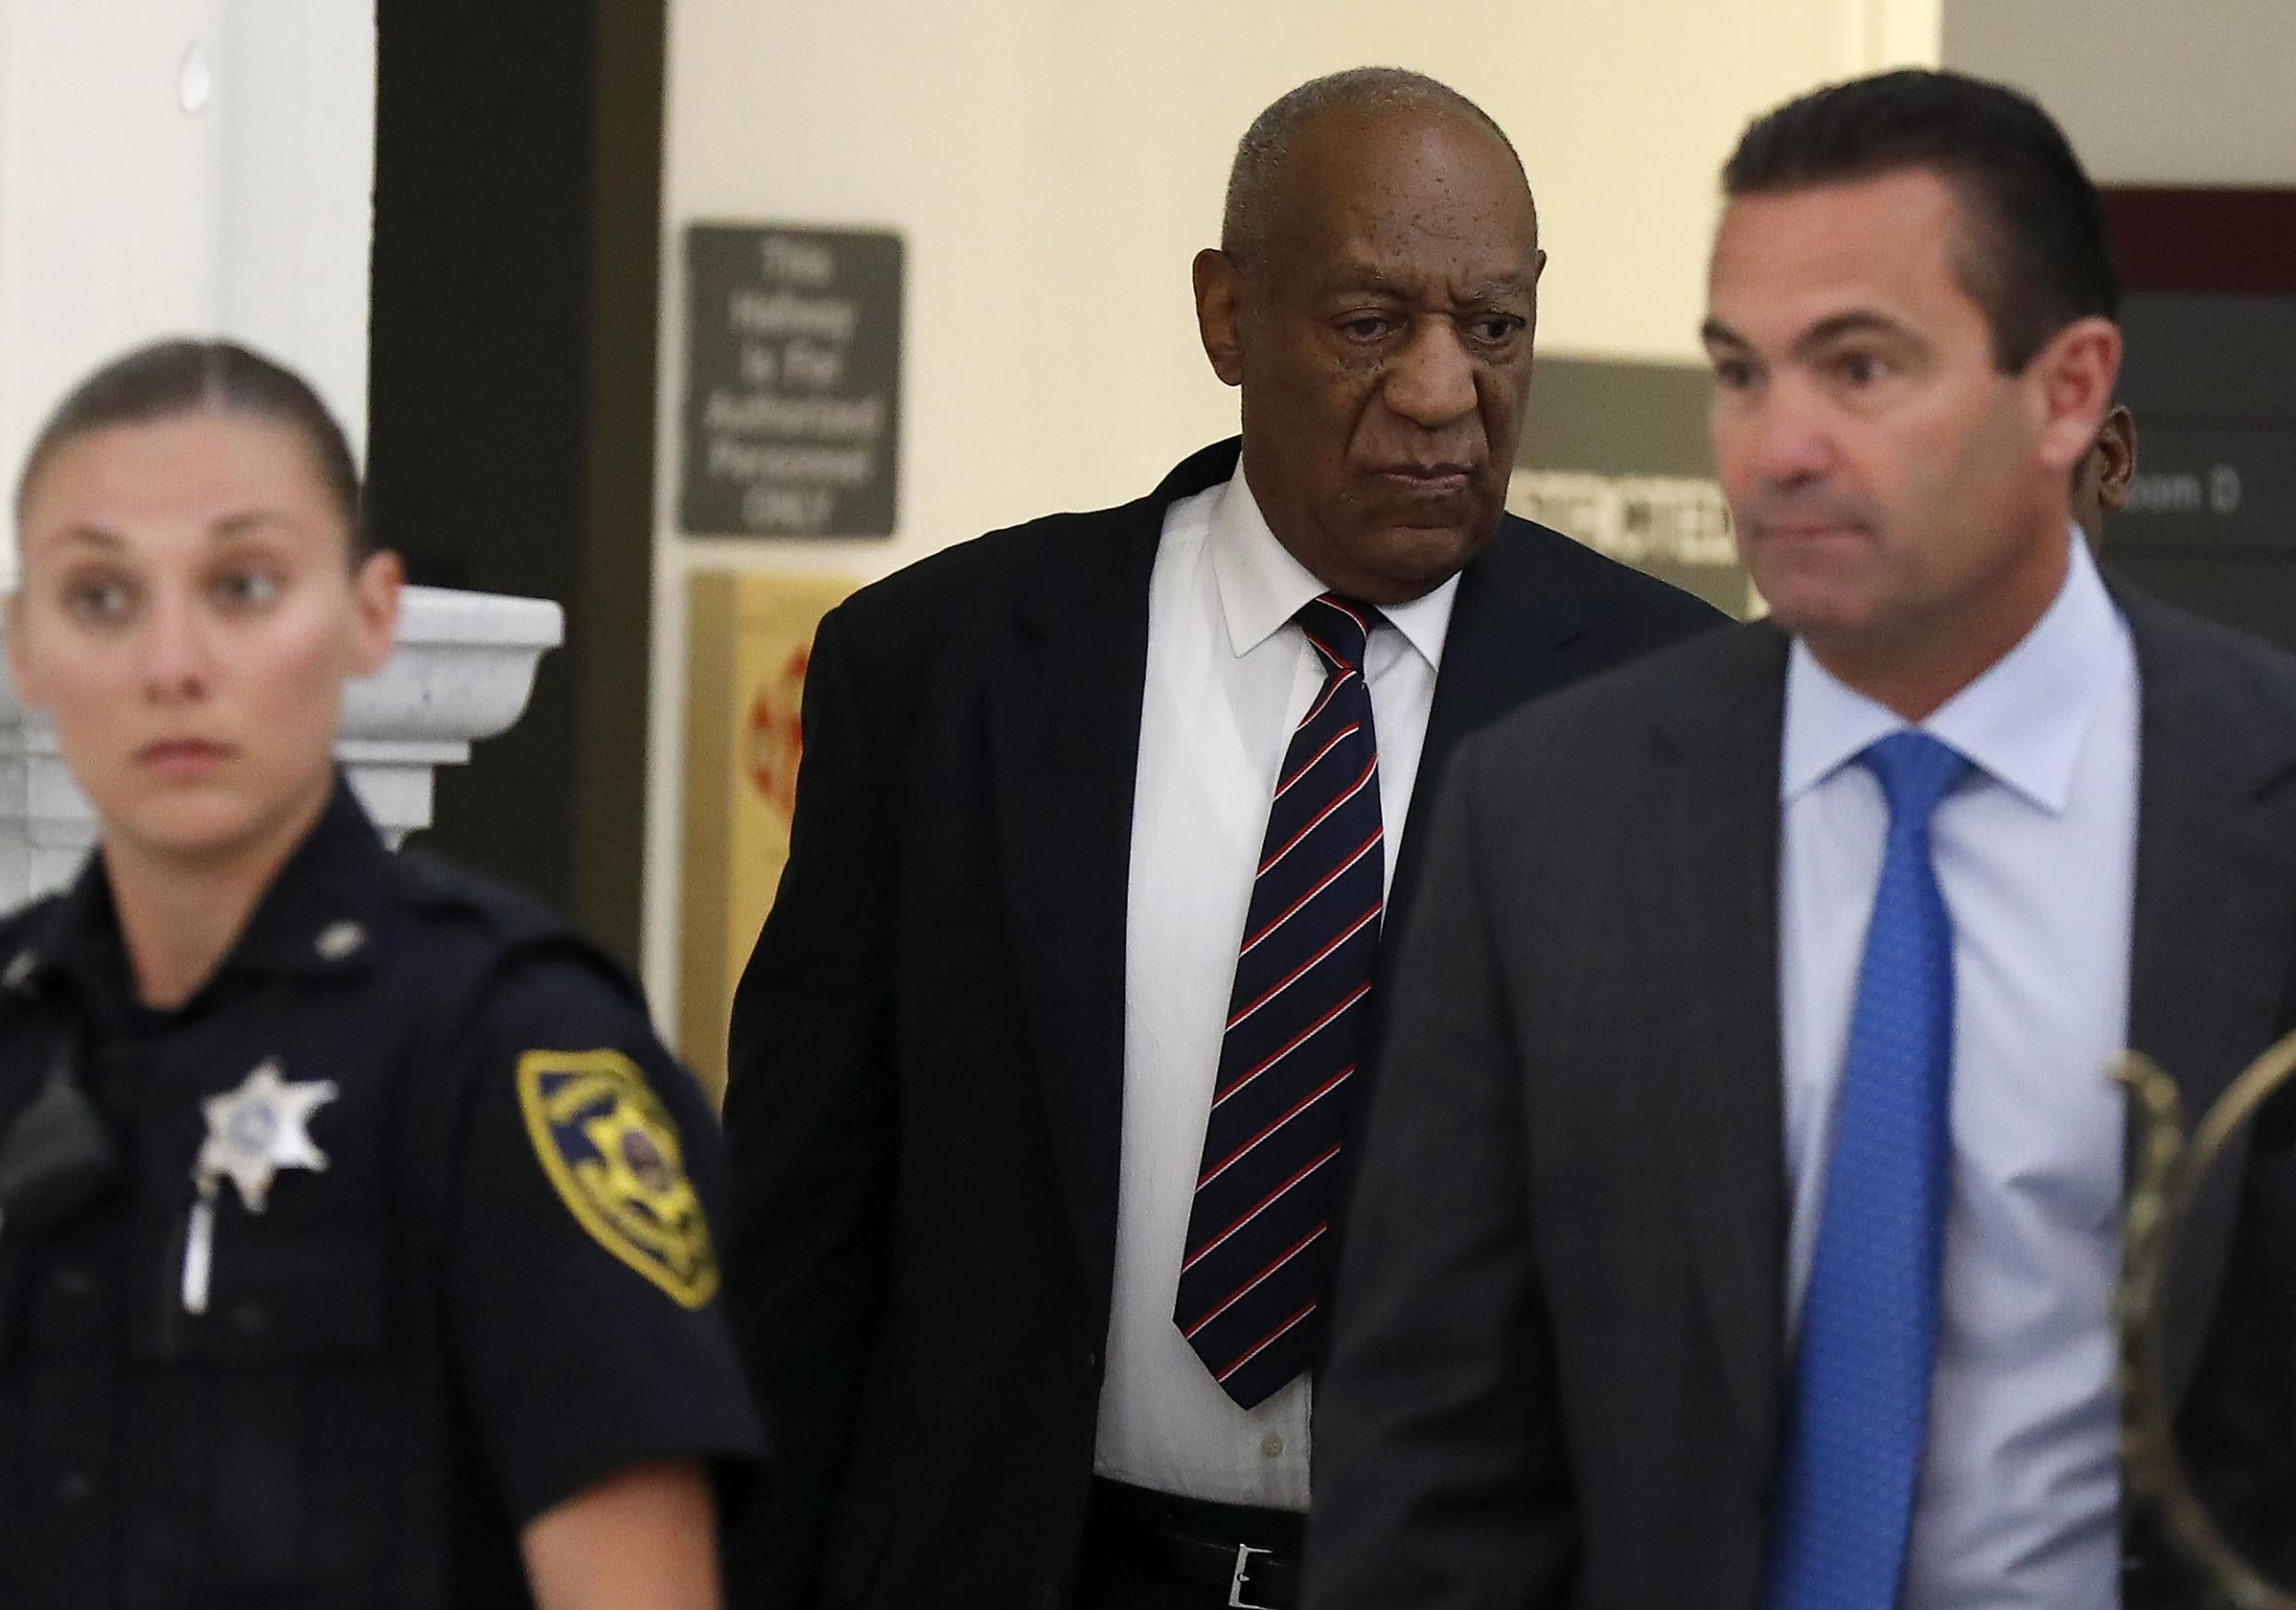 Bill Cosby arrives for his trial on sexual assault charges at the Montgomery County Courthouse in Norristown, Pennslyvania